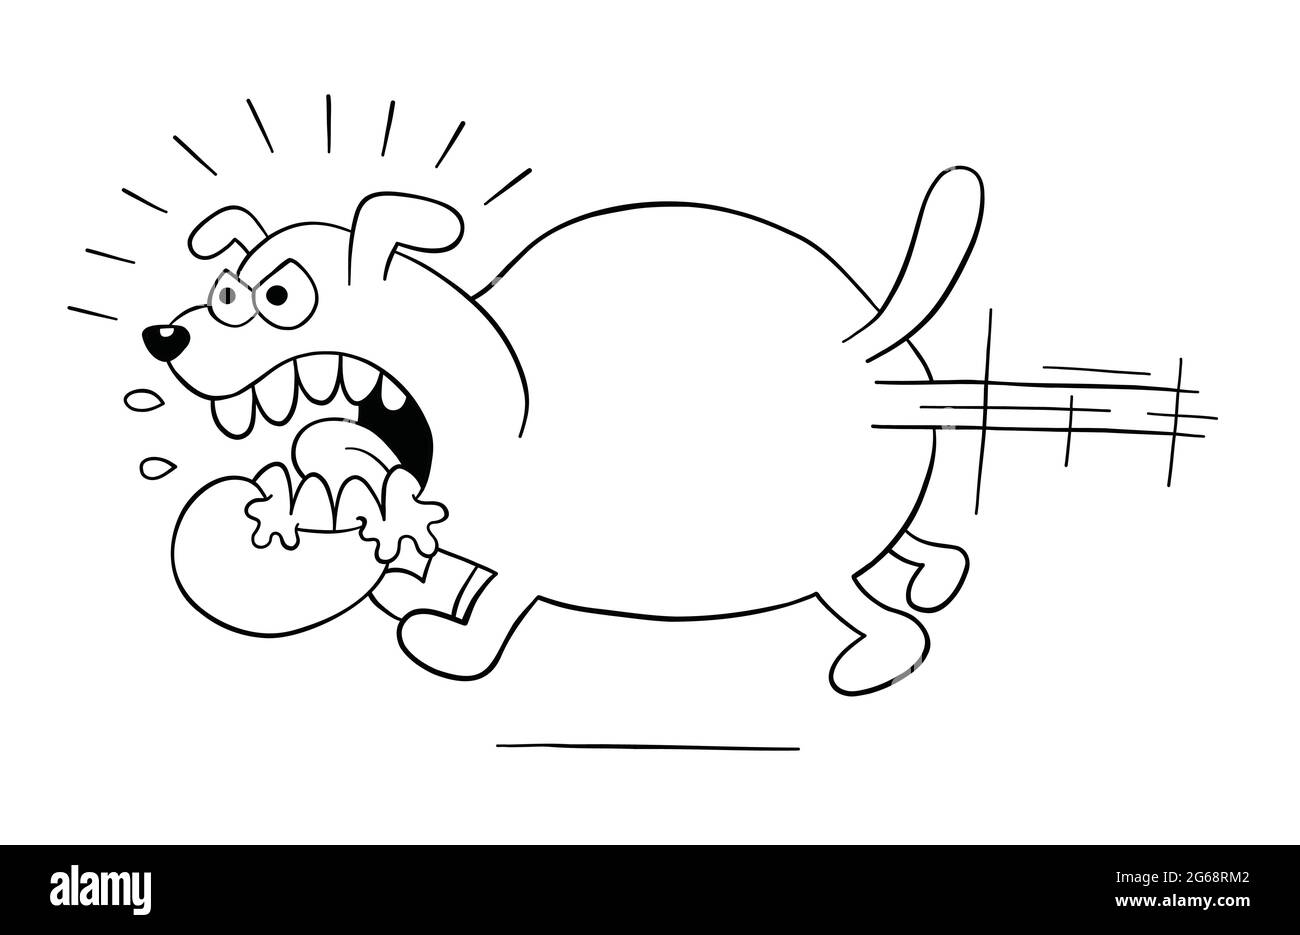 Cartoon angry and big dog running, vector illustration. Black outlined and white colored. Stock Vector